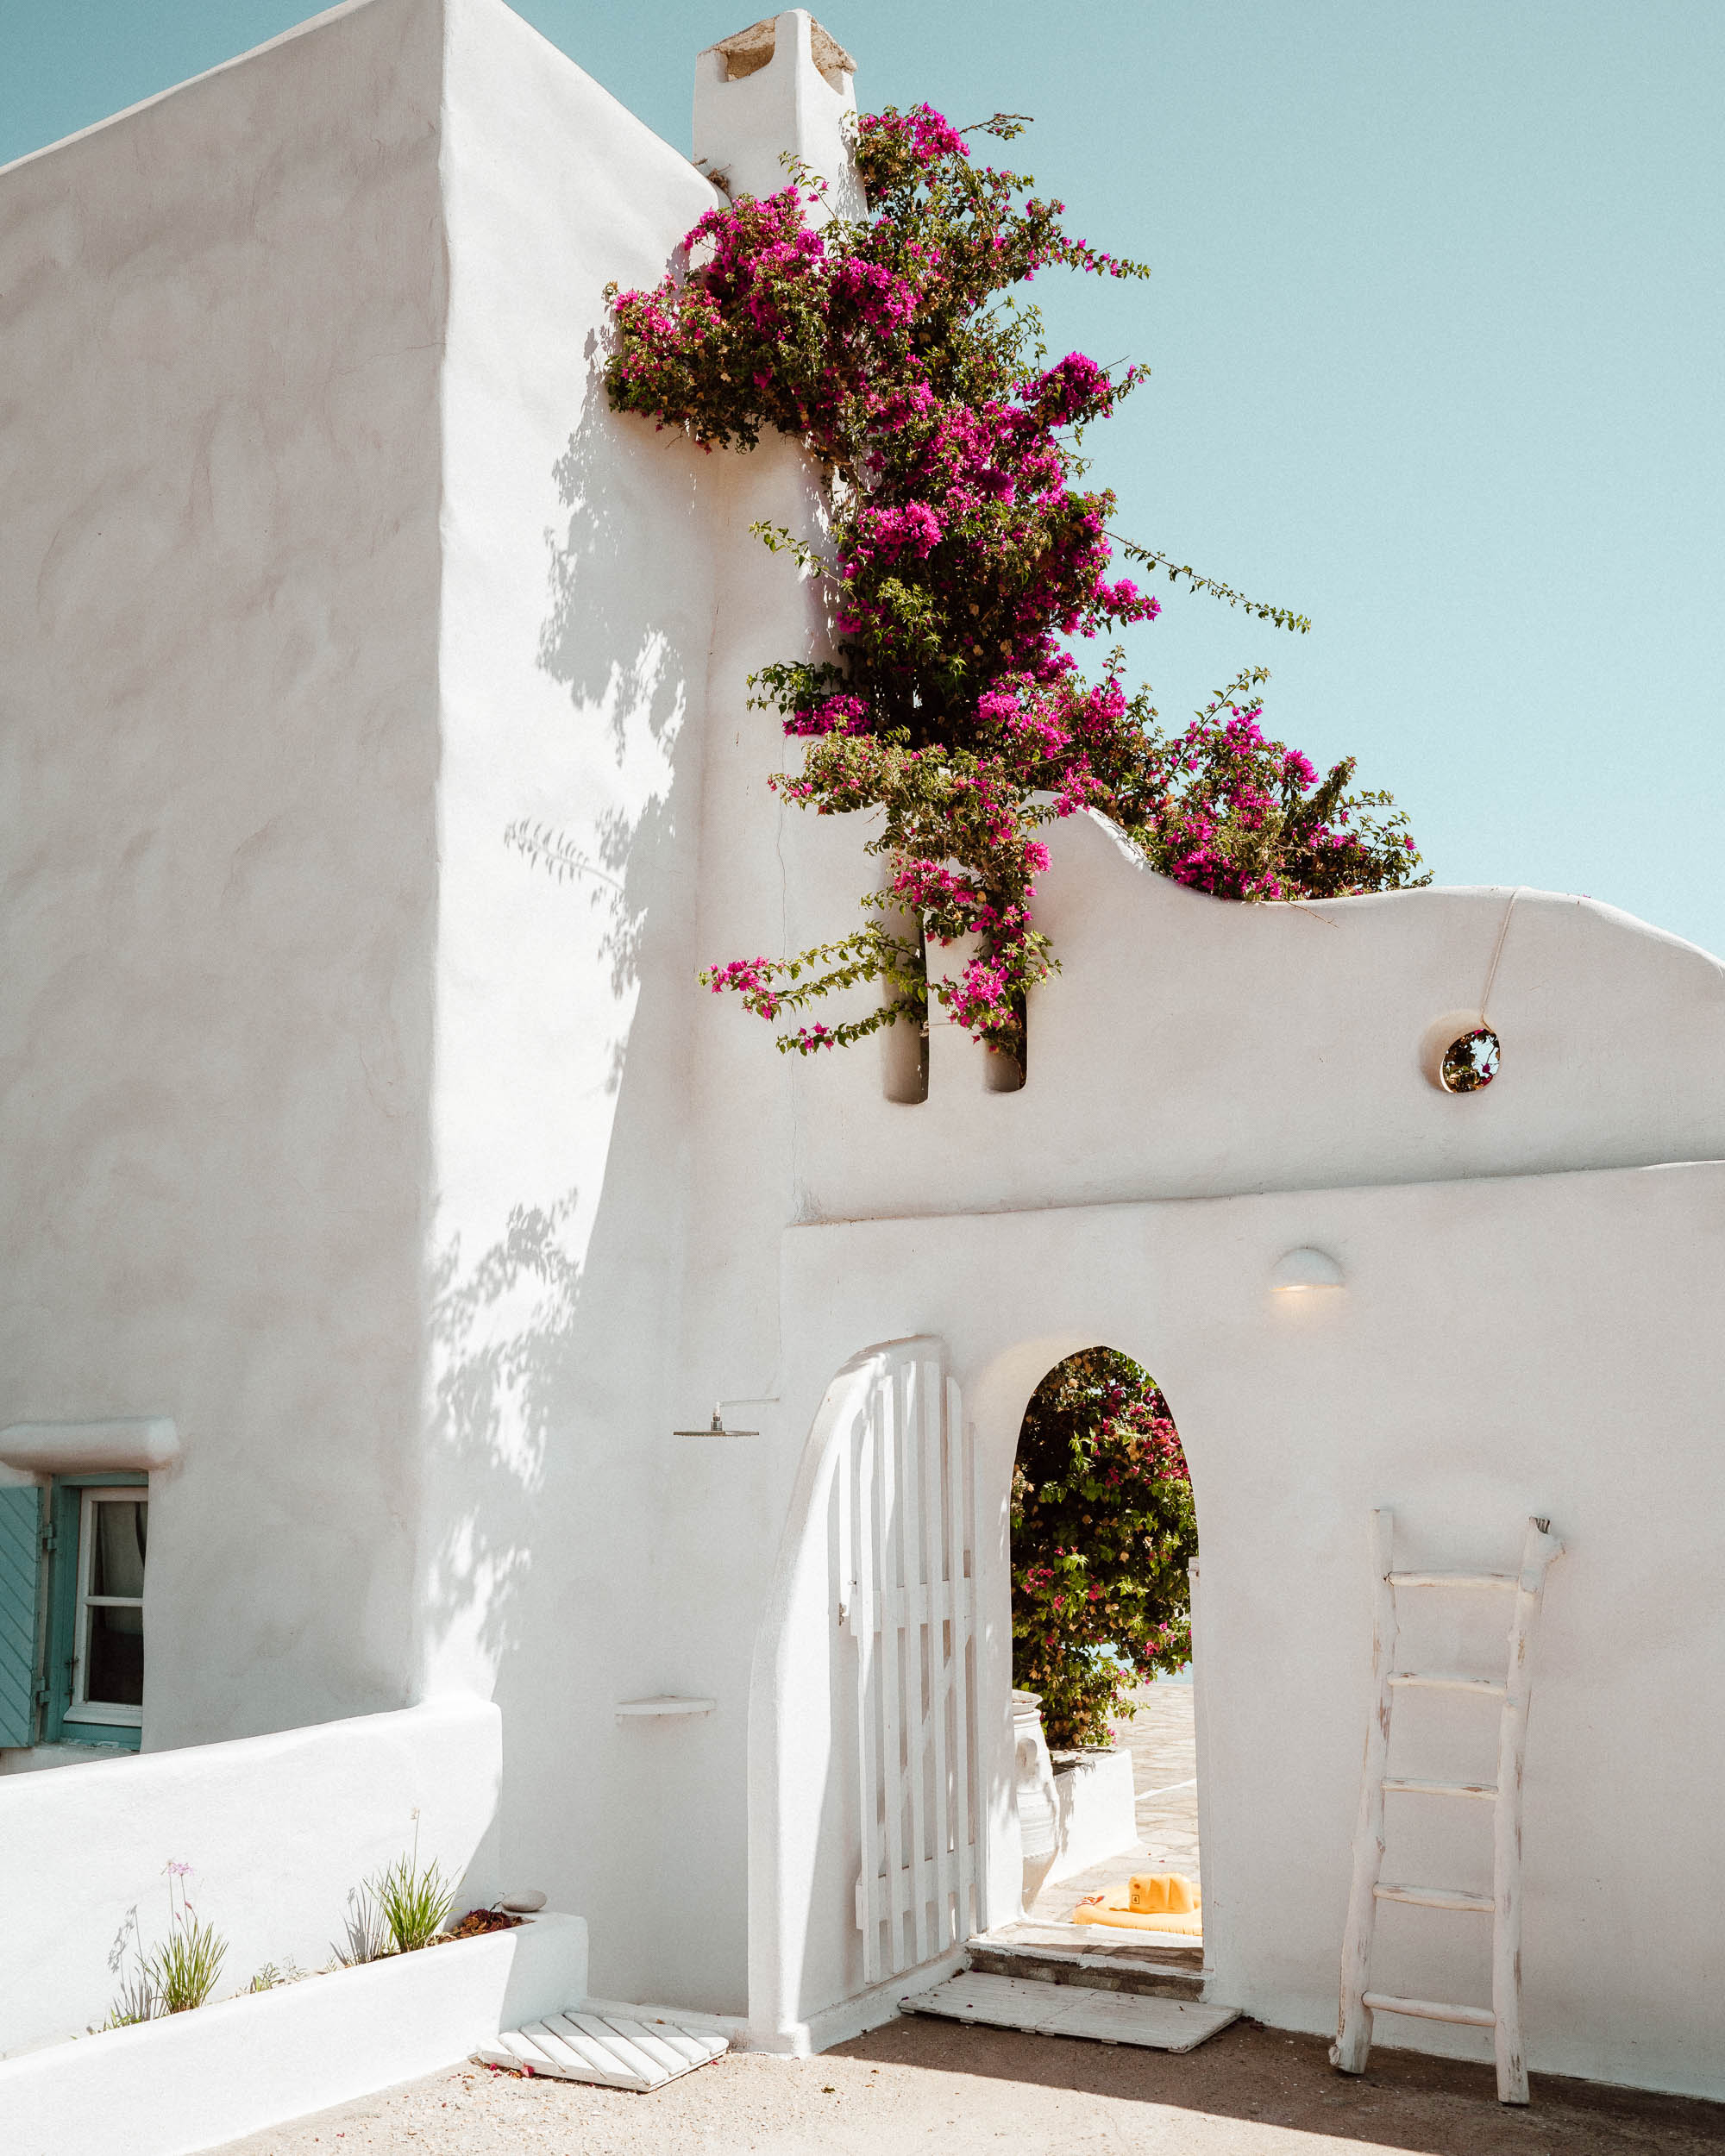 Our rental house in Paros, Greece via @finduslost